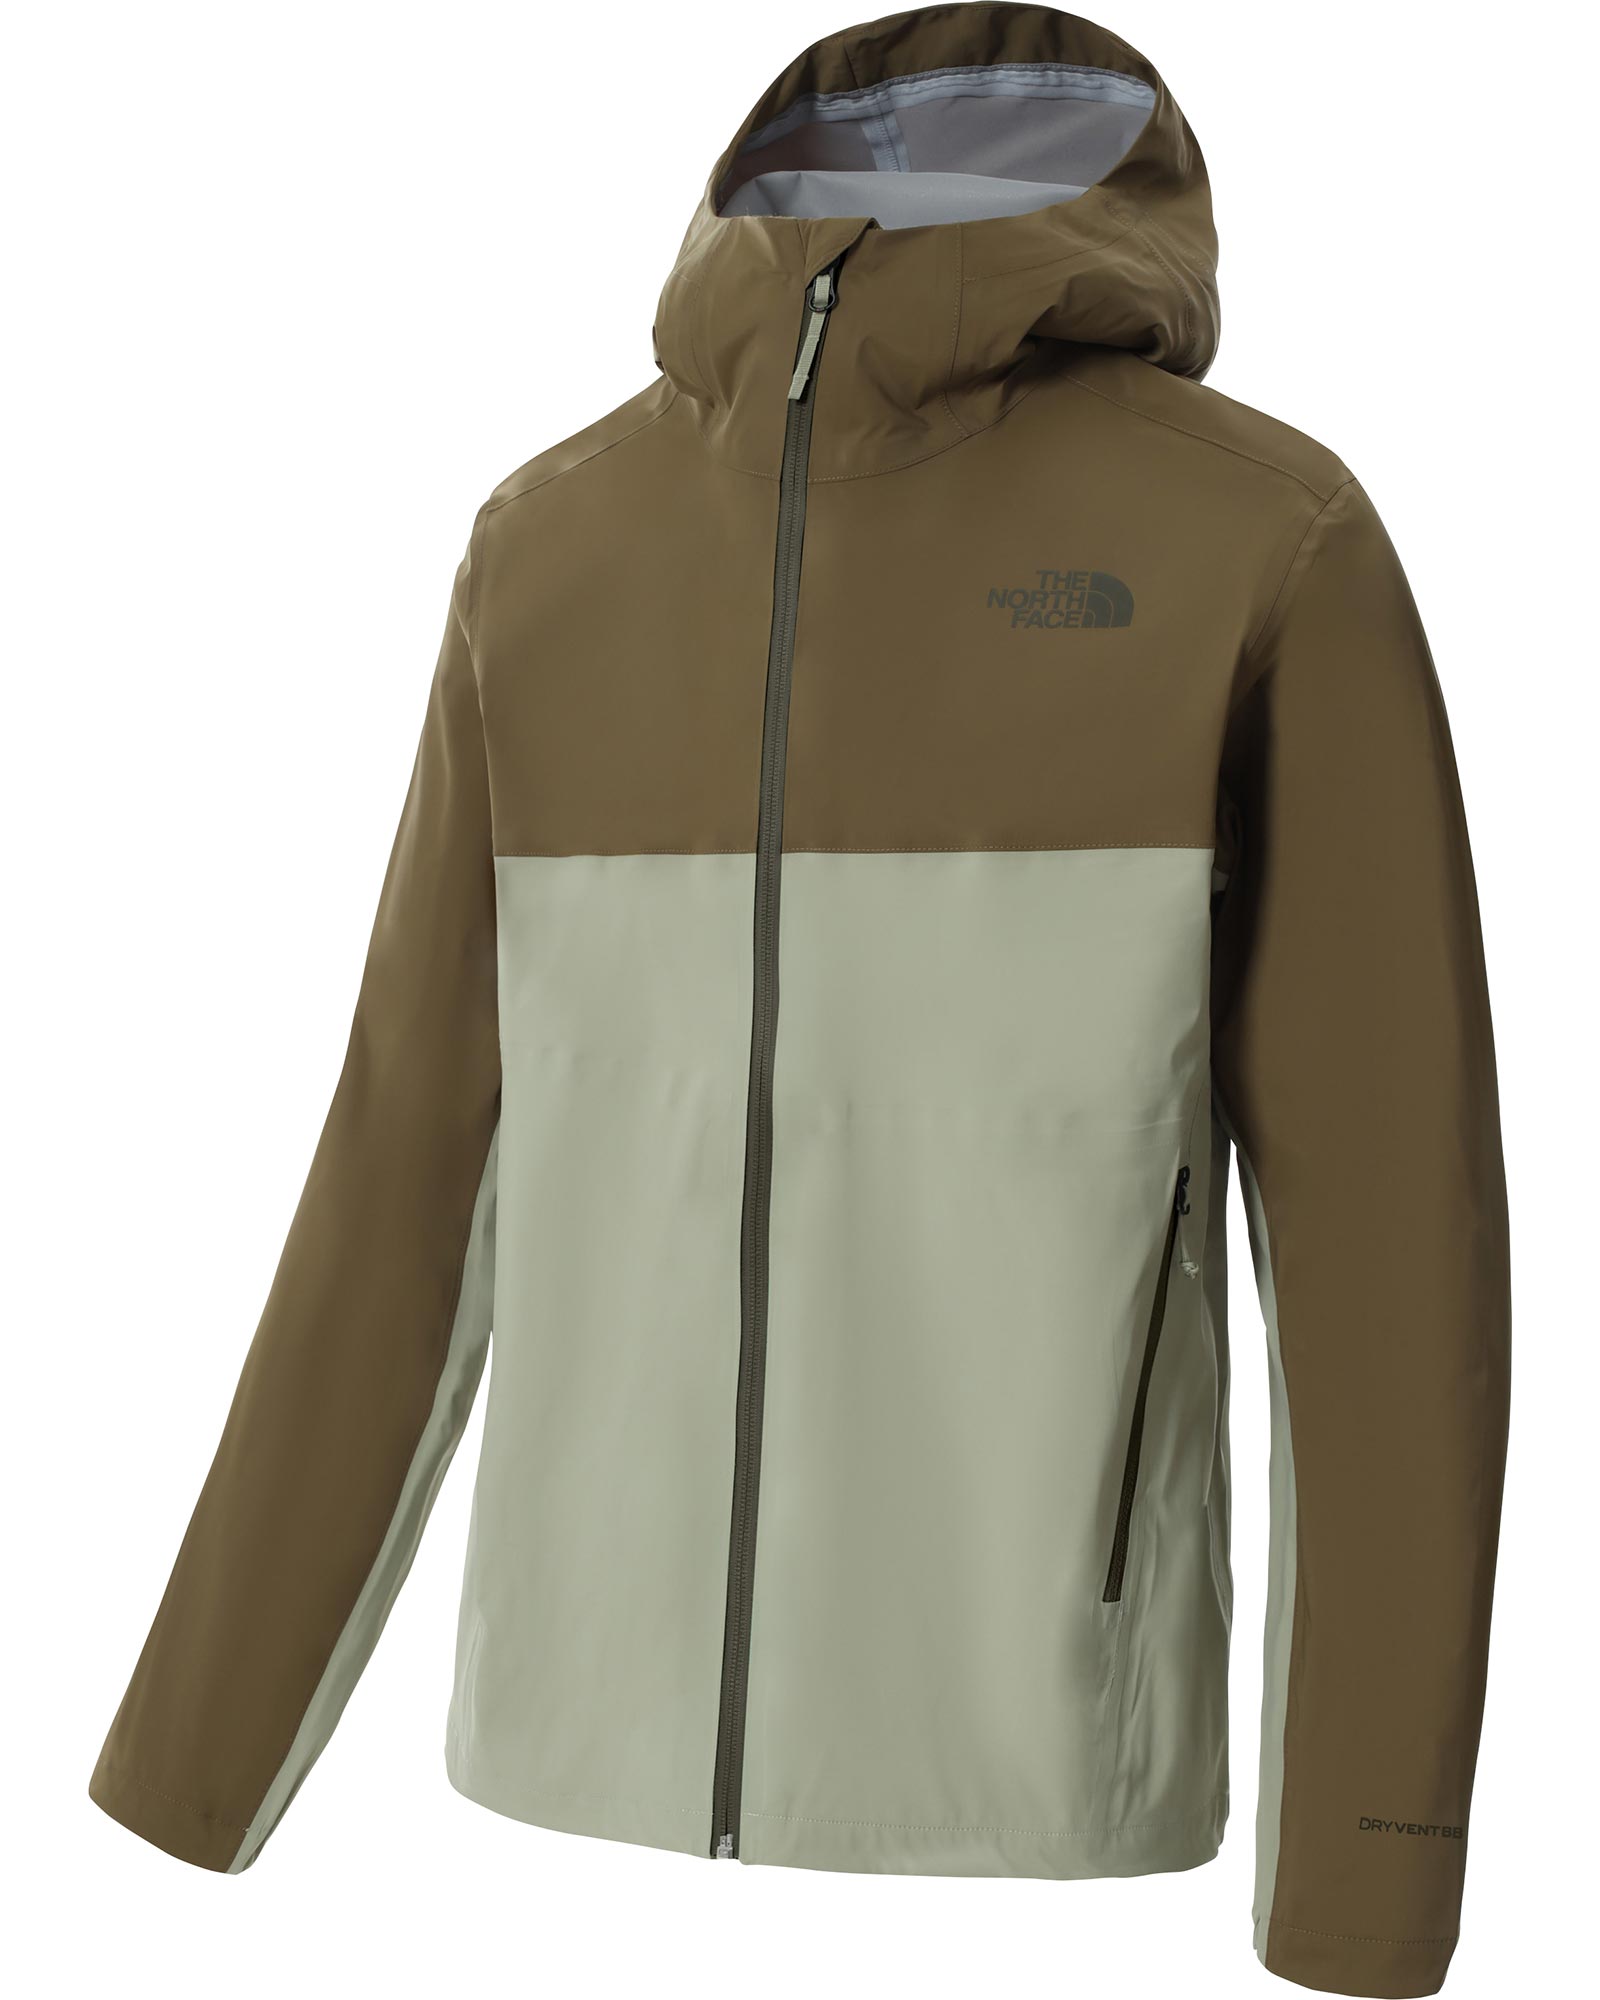 The North Face West Basin DryVent Men’s Jacket - Military Olive M